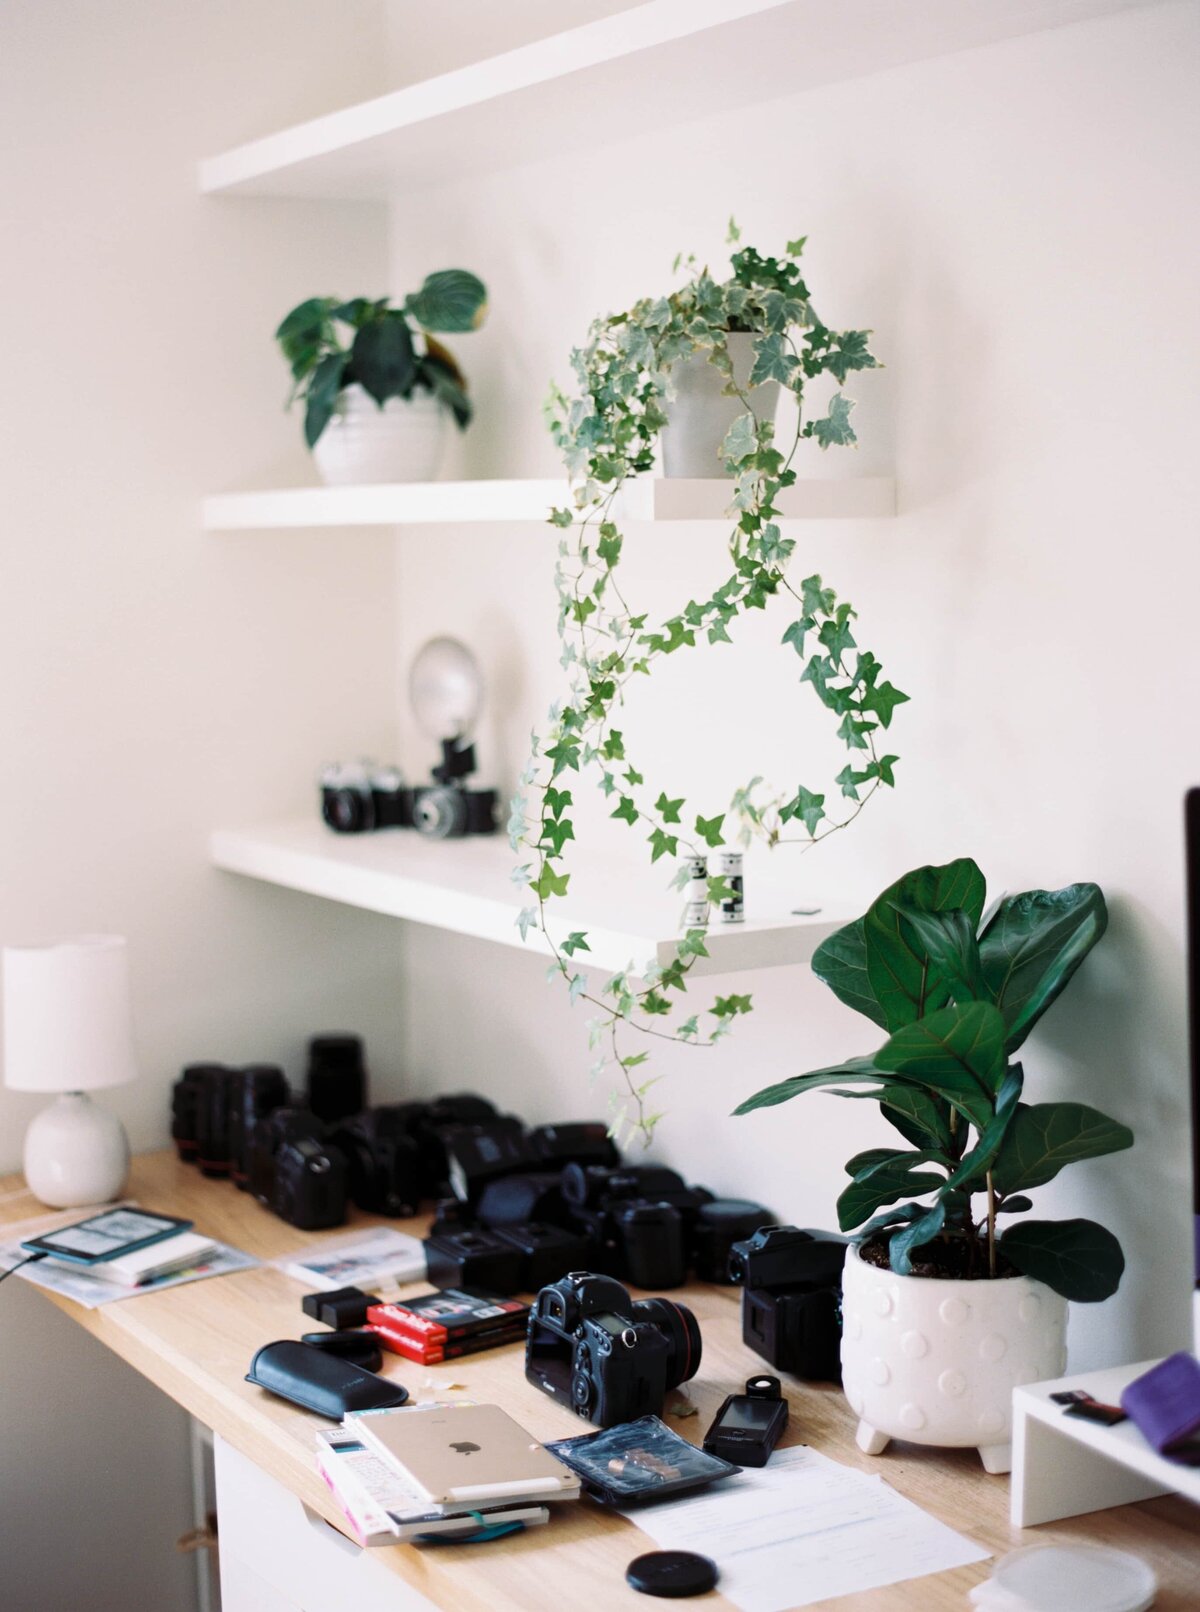 Image of an office desk with cameras strewn on the desk and plants on the shelves of a white room.